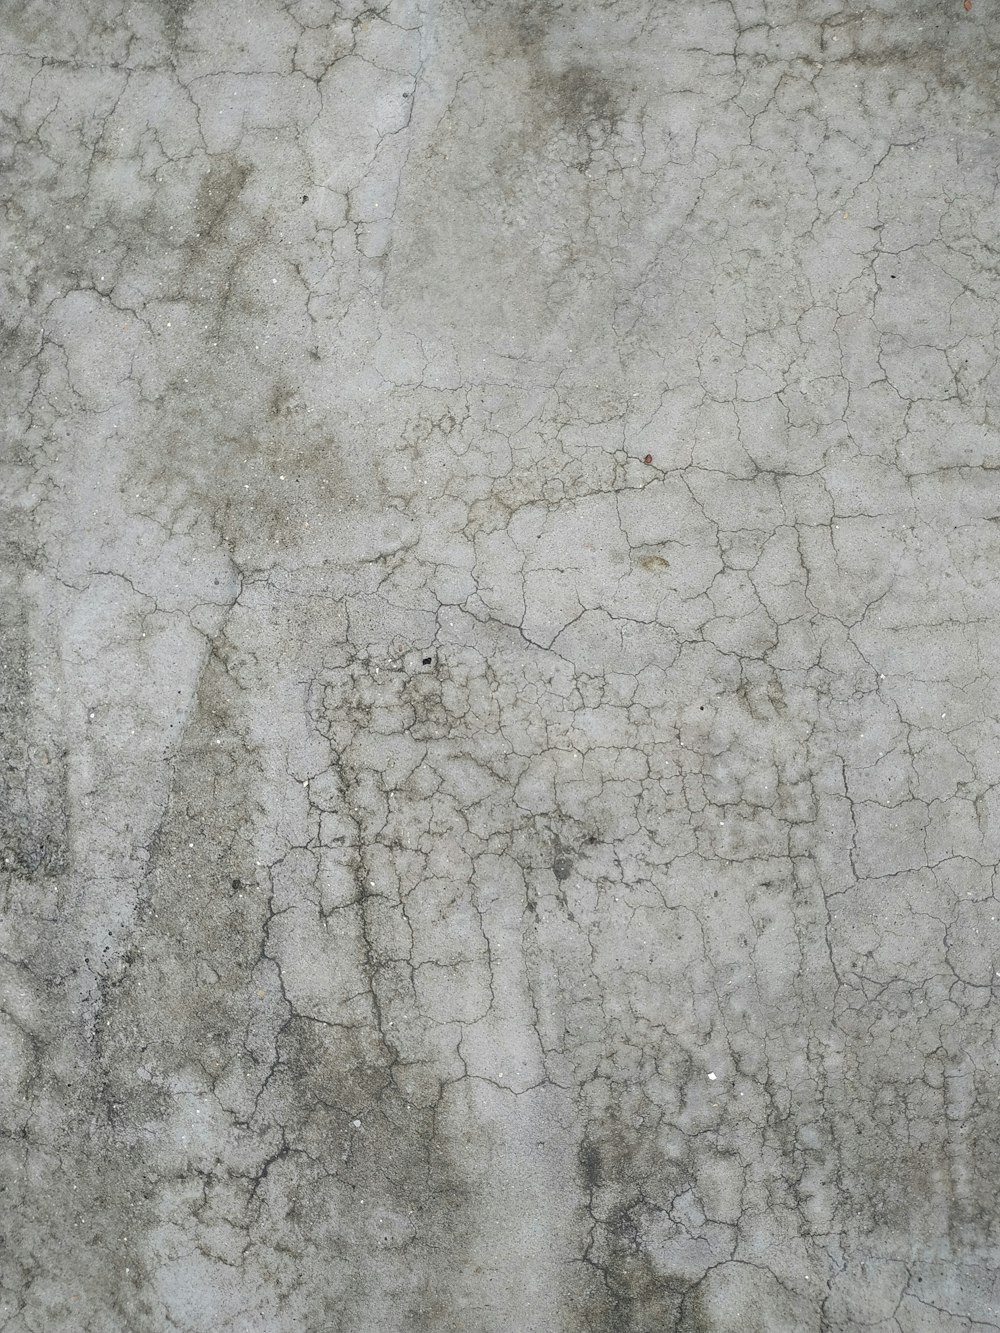 a close up of a cement surface with cracks